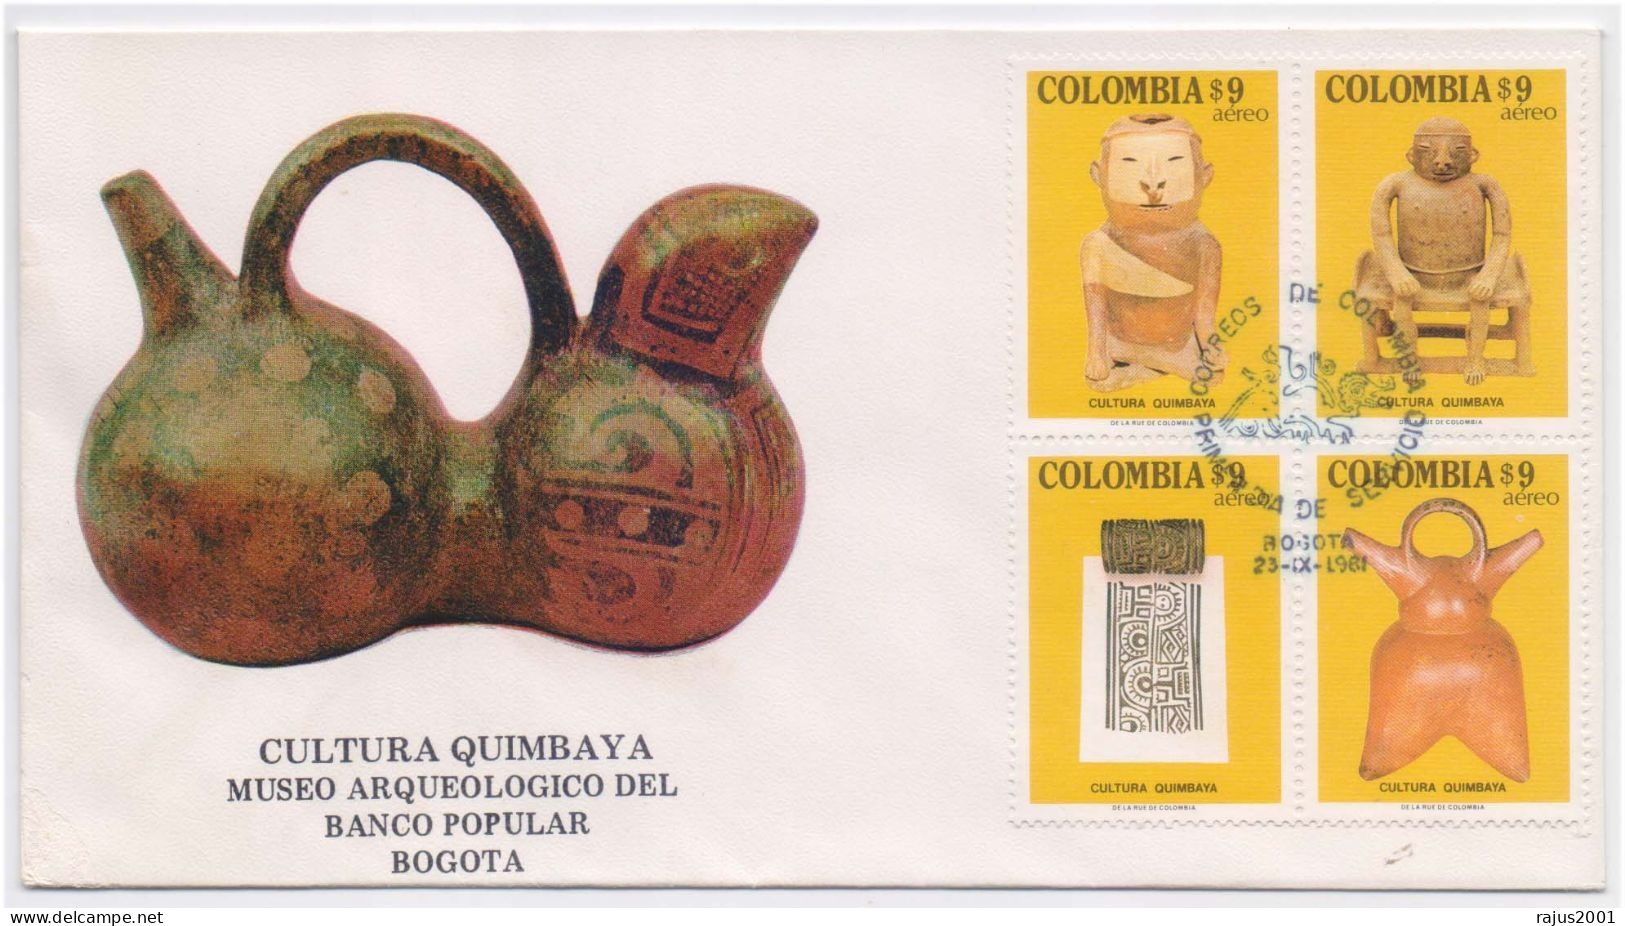 Culture Quimbaya, Archaeological Museum, Archaeology, Indigenous Indian Handicrafts, Sculpture, Colombia FDC - Archéologie